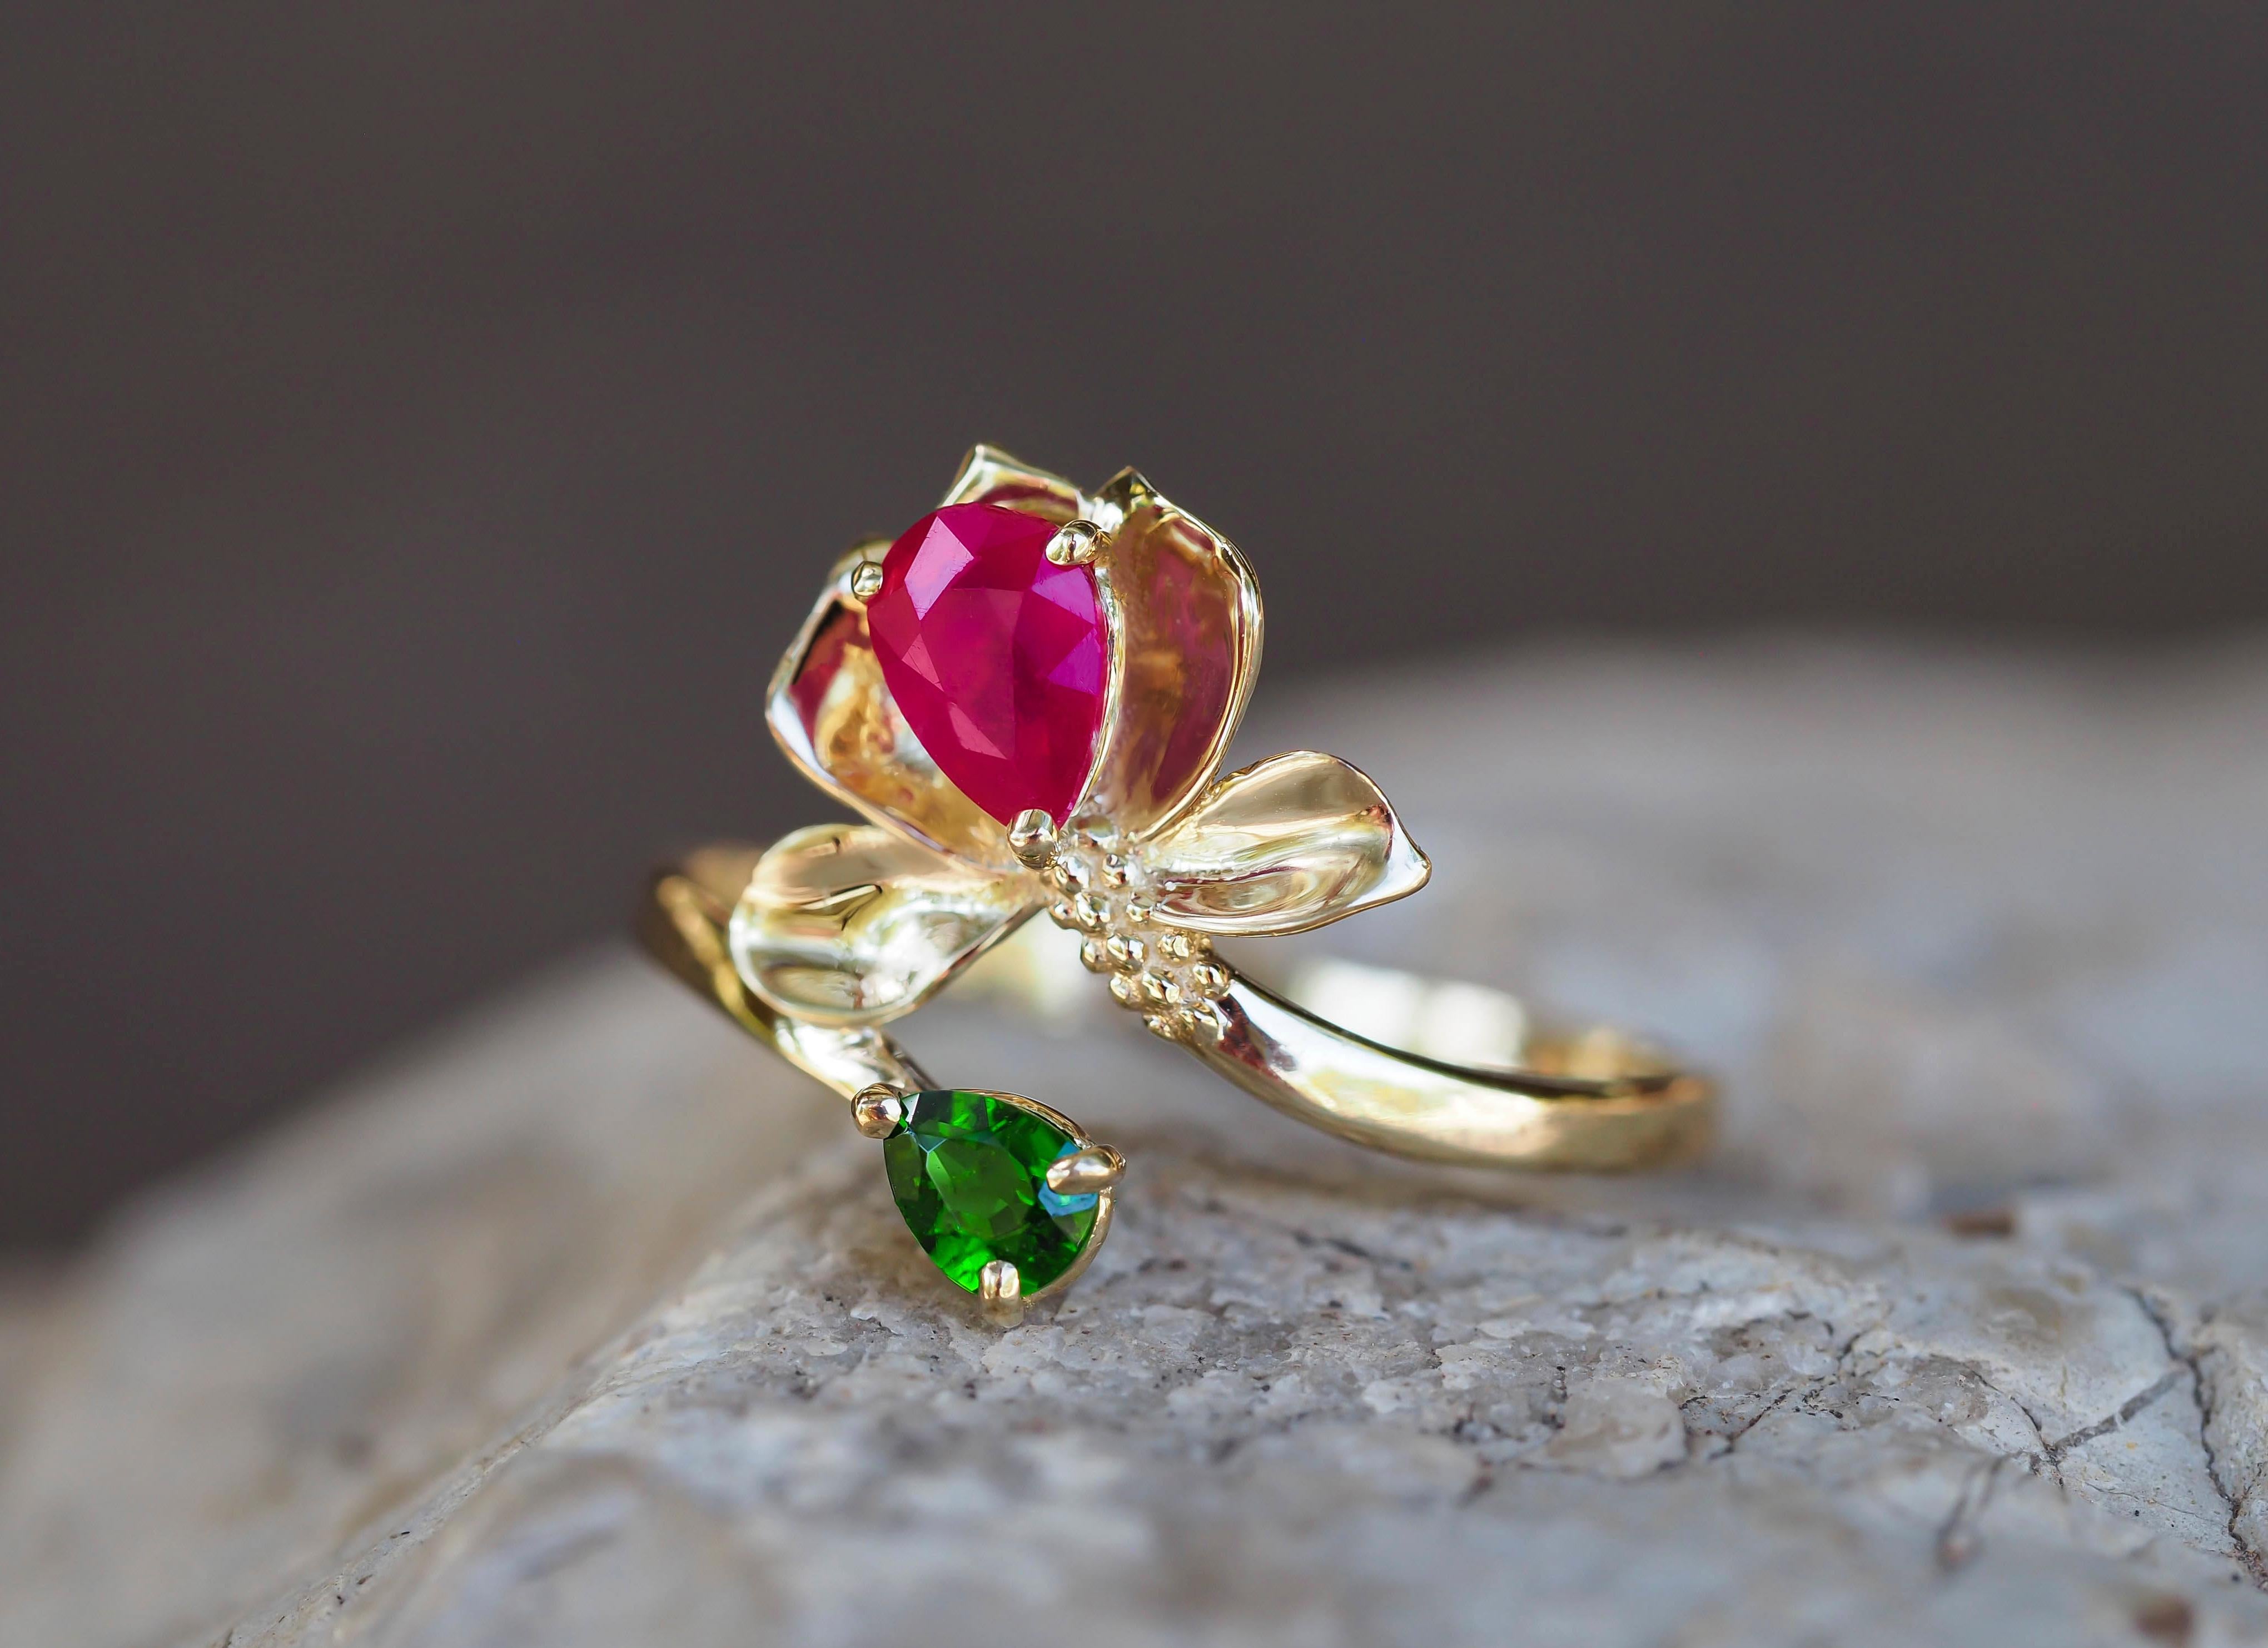 For Sale:  14 K Gold Ring with Ruby and Chrome Diopside. Water Lily Flower Gold Ring! 10